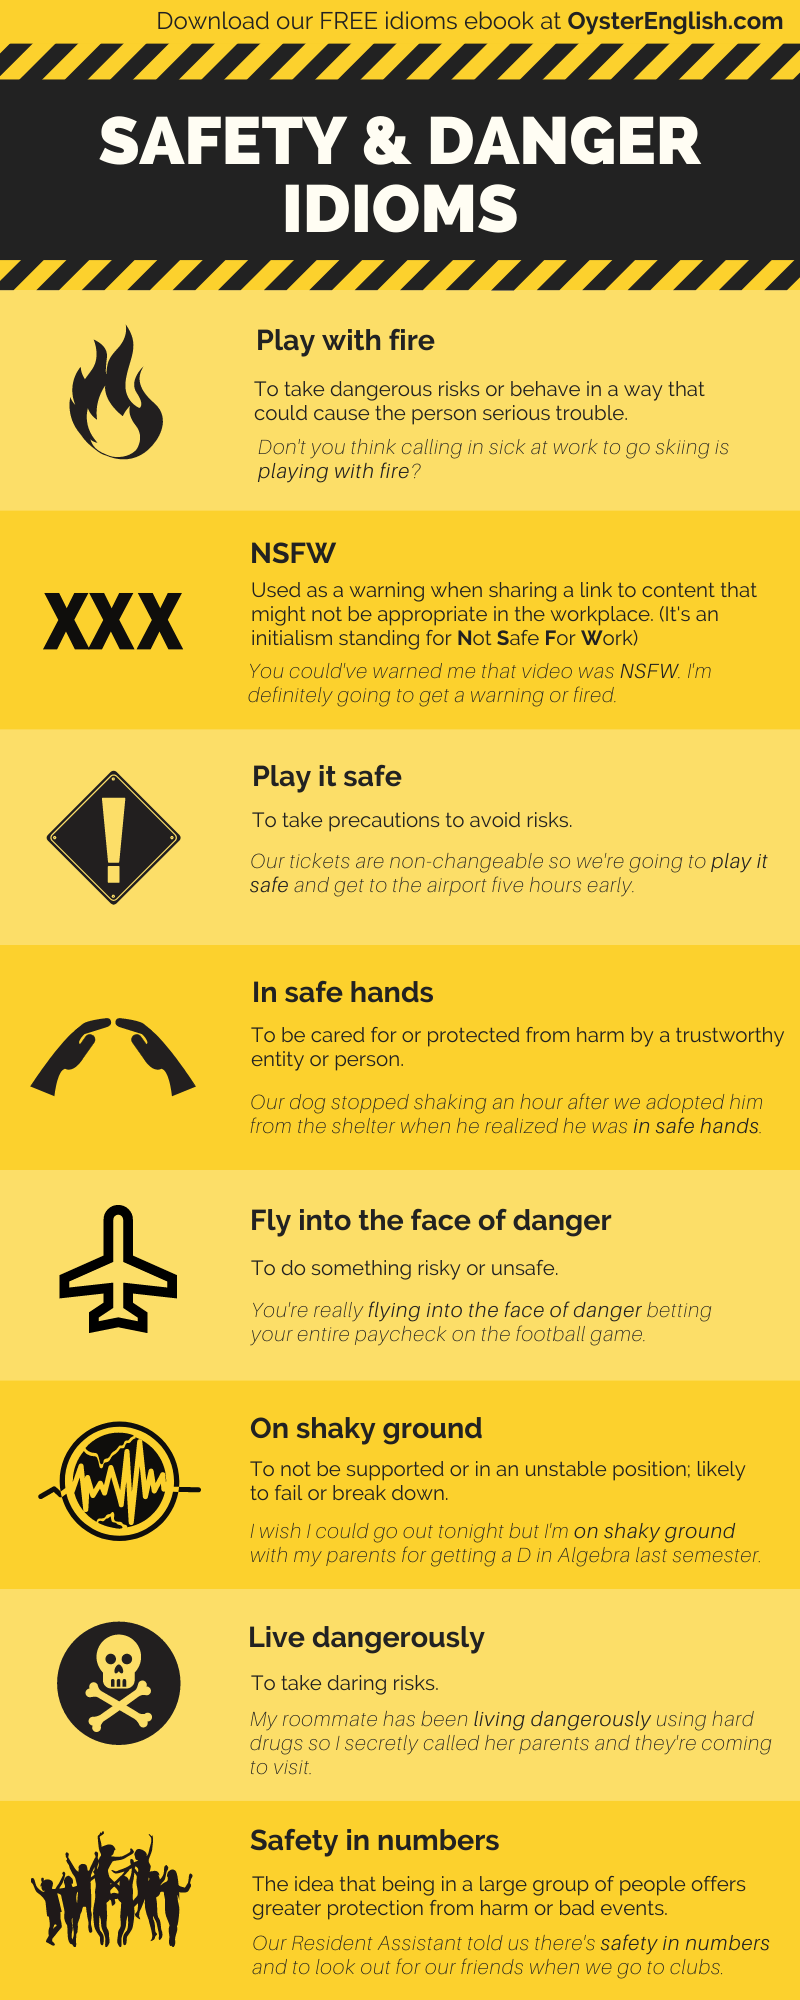 An infographic listing the 8 safety and danger idioms listed on this webpage with example sentences.